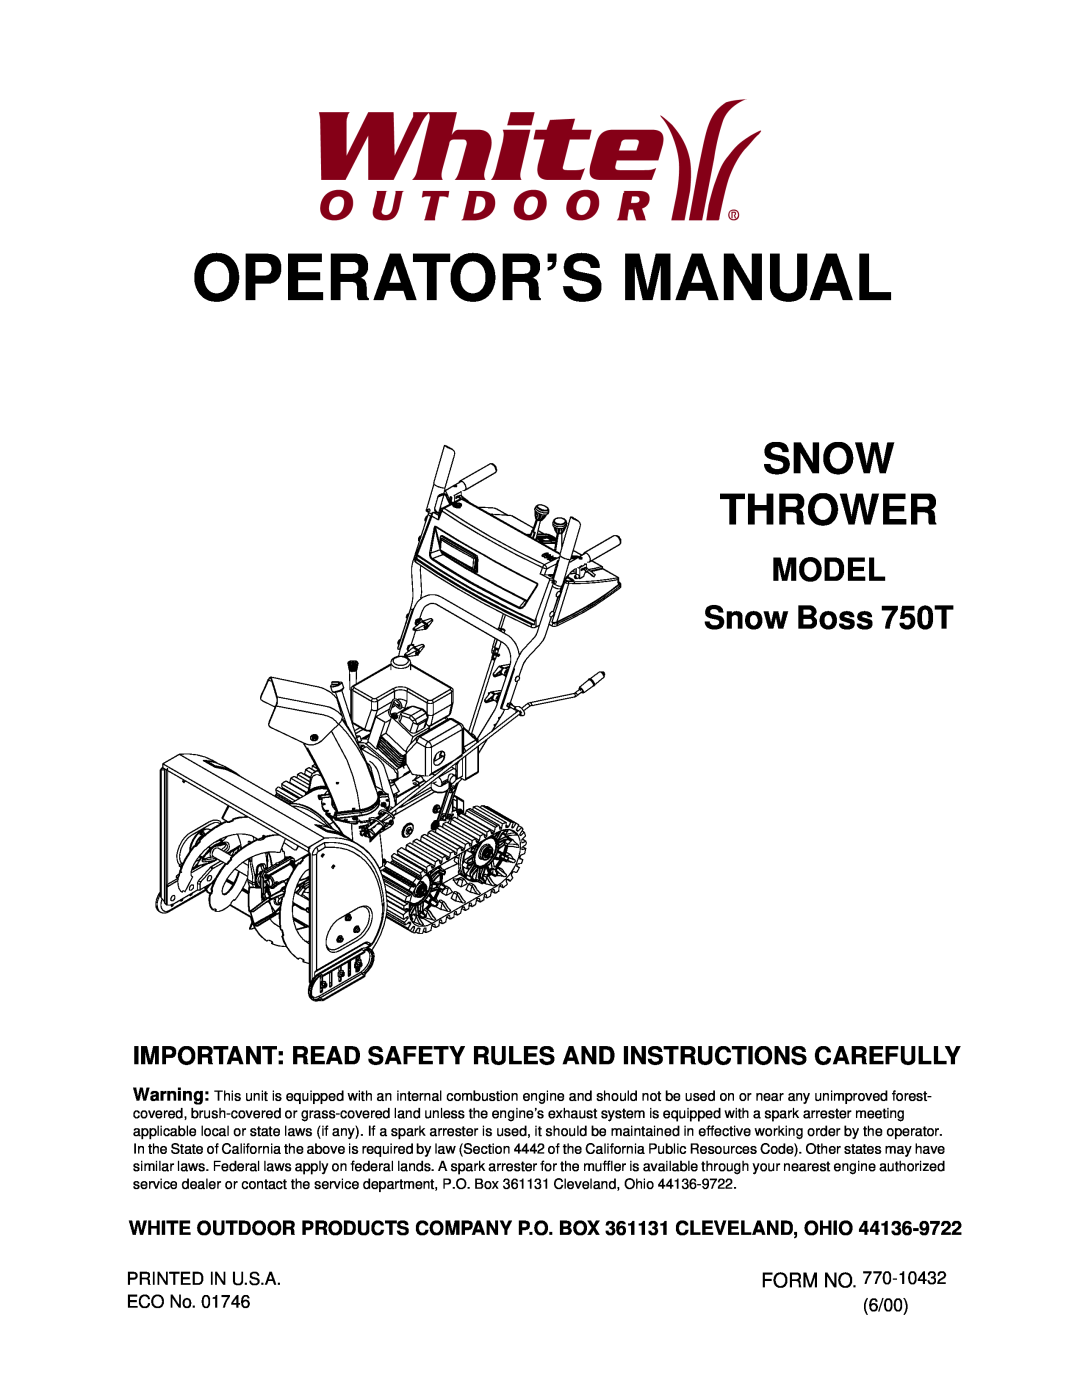 White Outdoor manual Operator’S Manual, Snow Thrower, MODEL Snow Boss 750T 